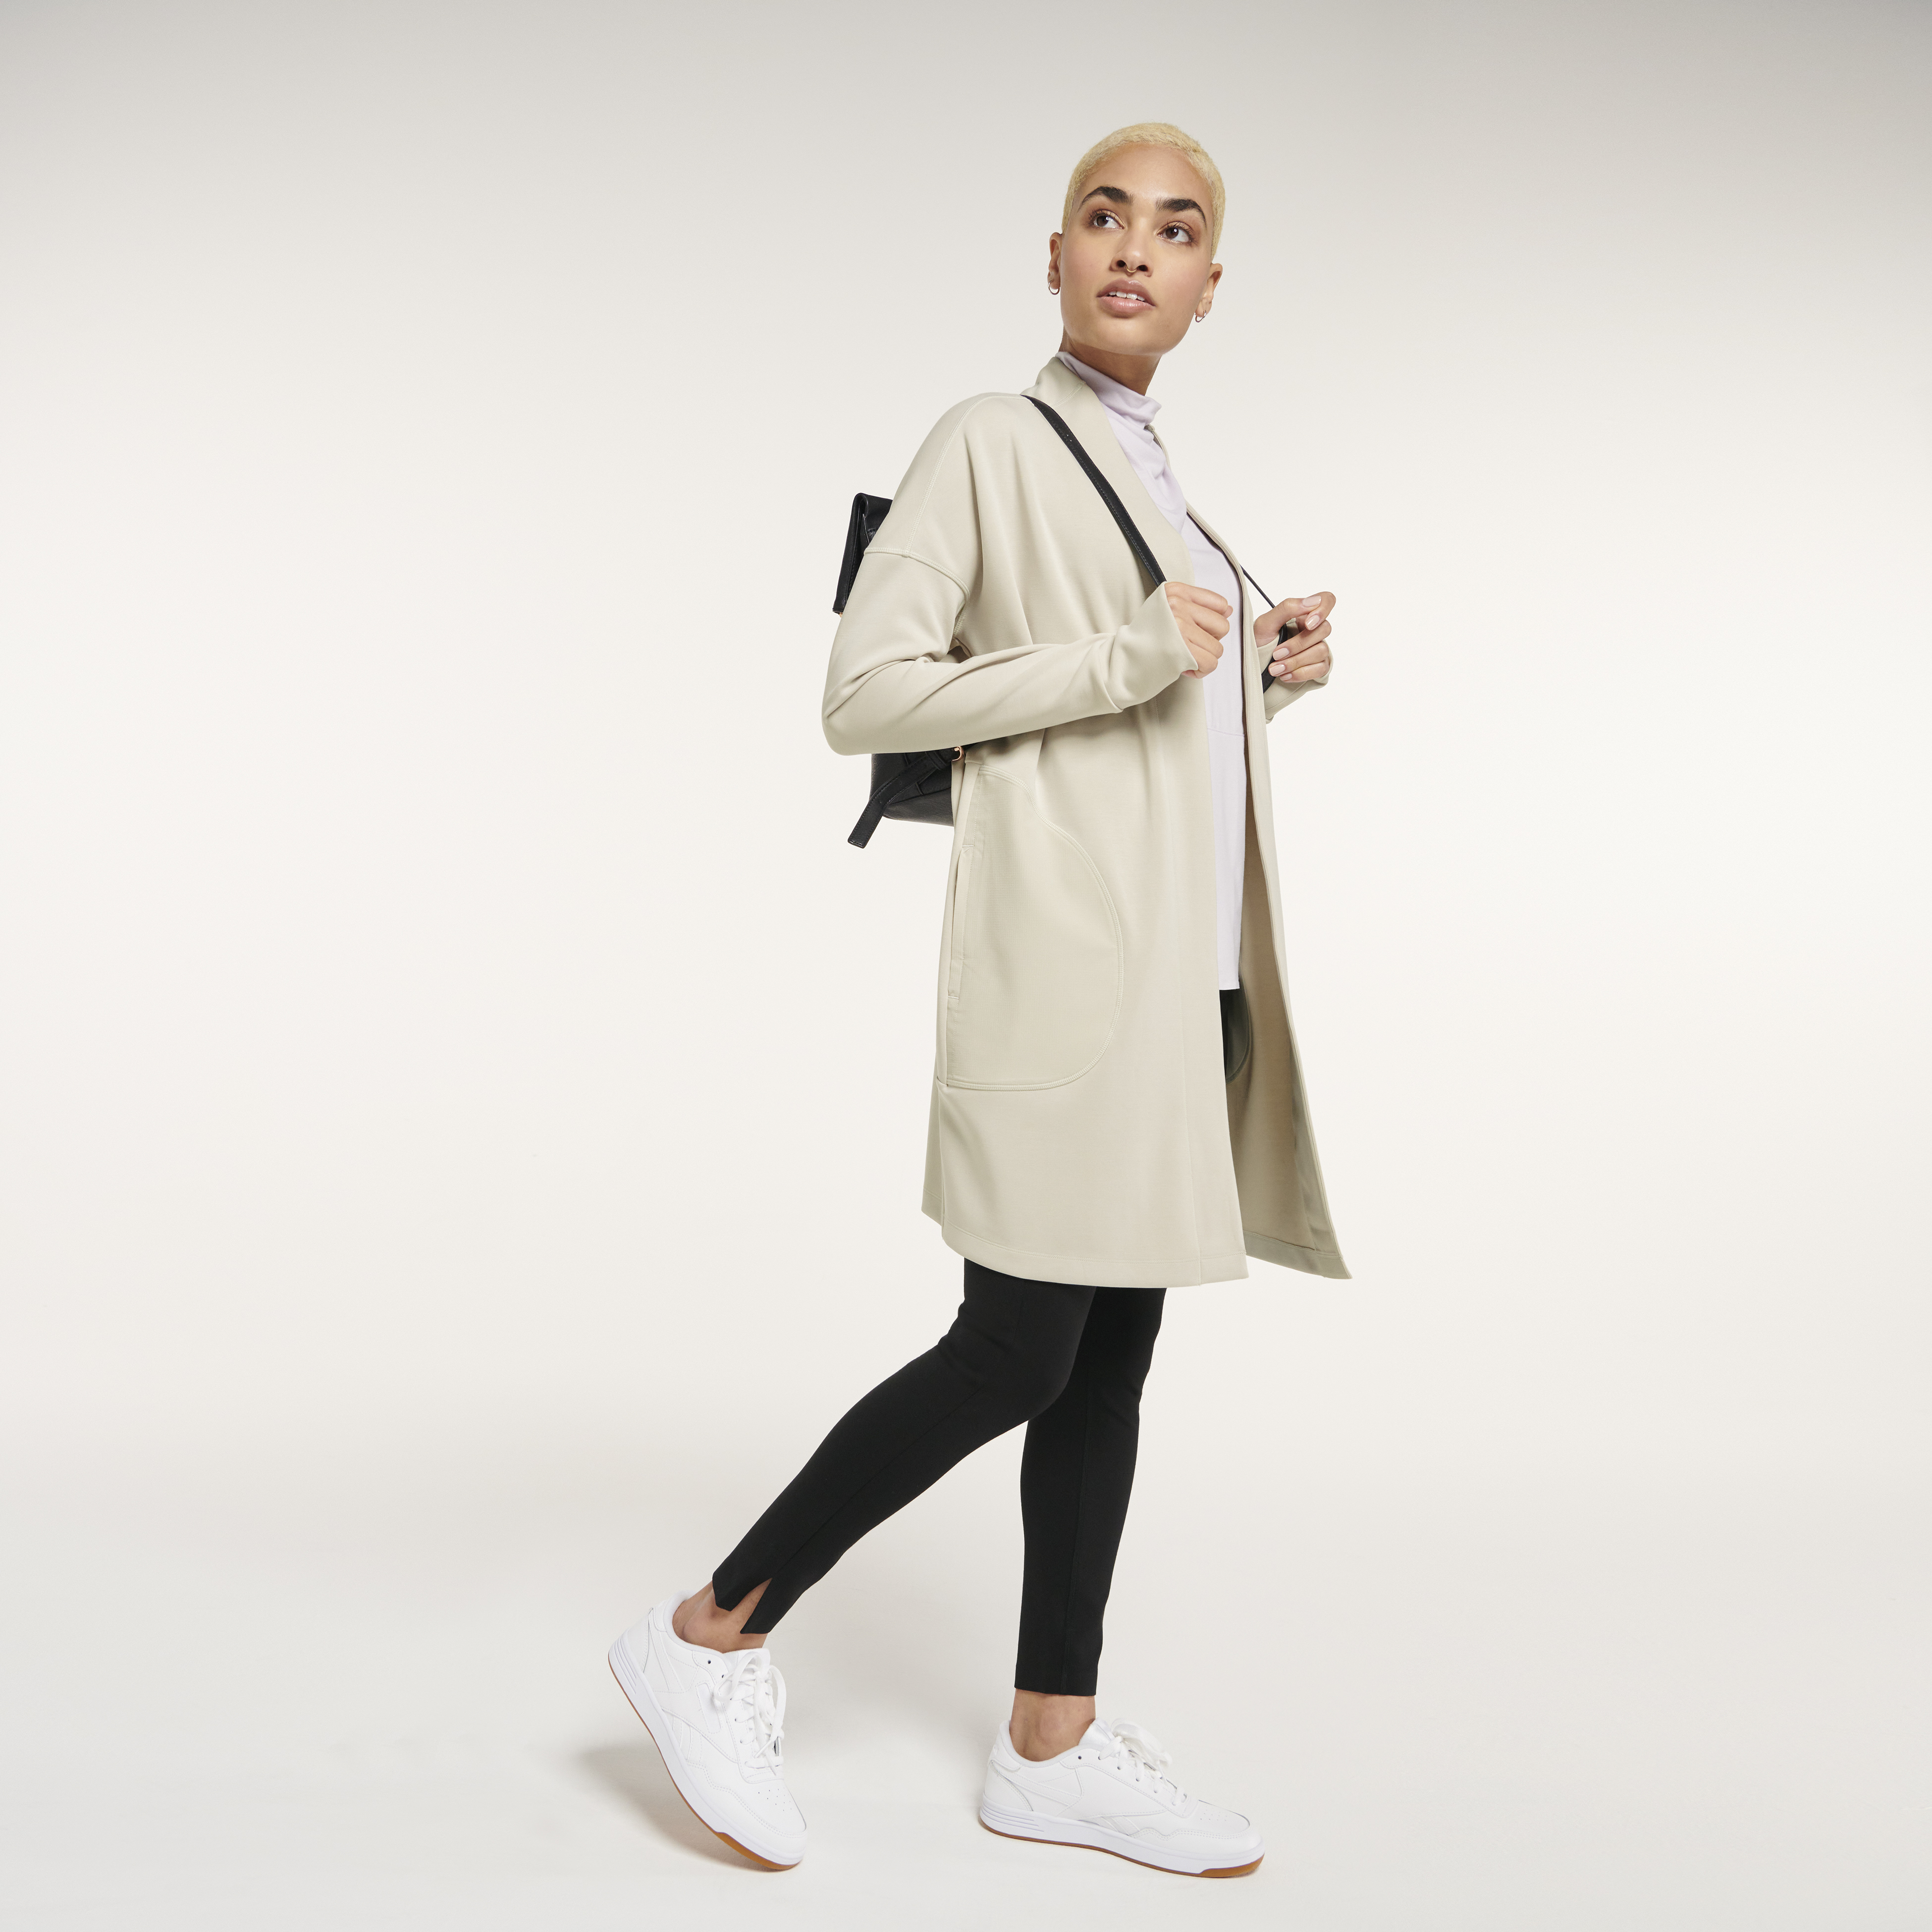 New Private Label, Specialty Athleisure Brand, FLX, Now Available at Kohl's